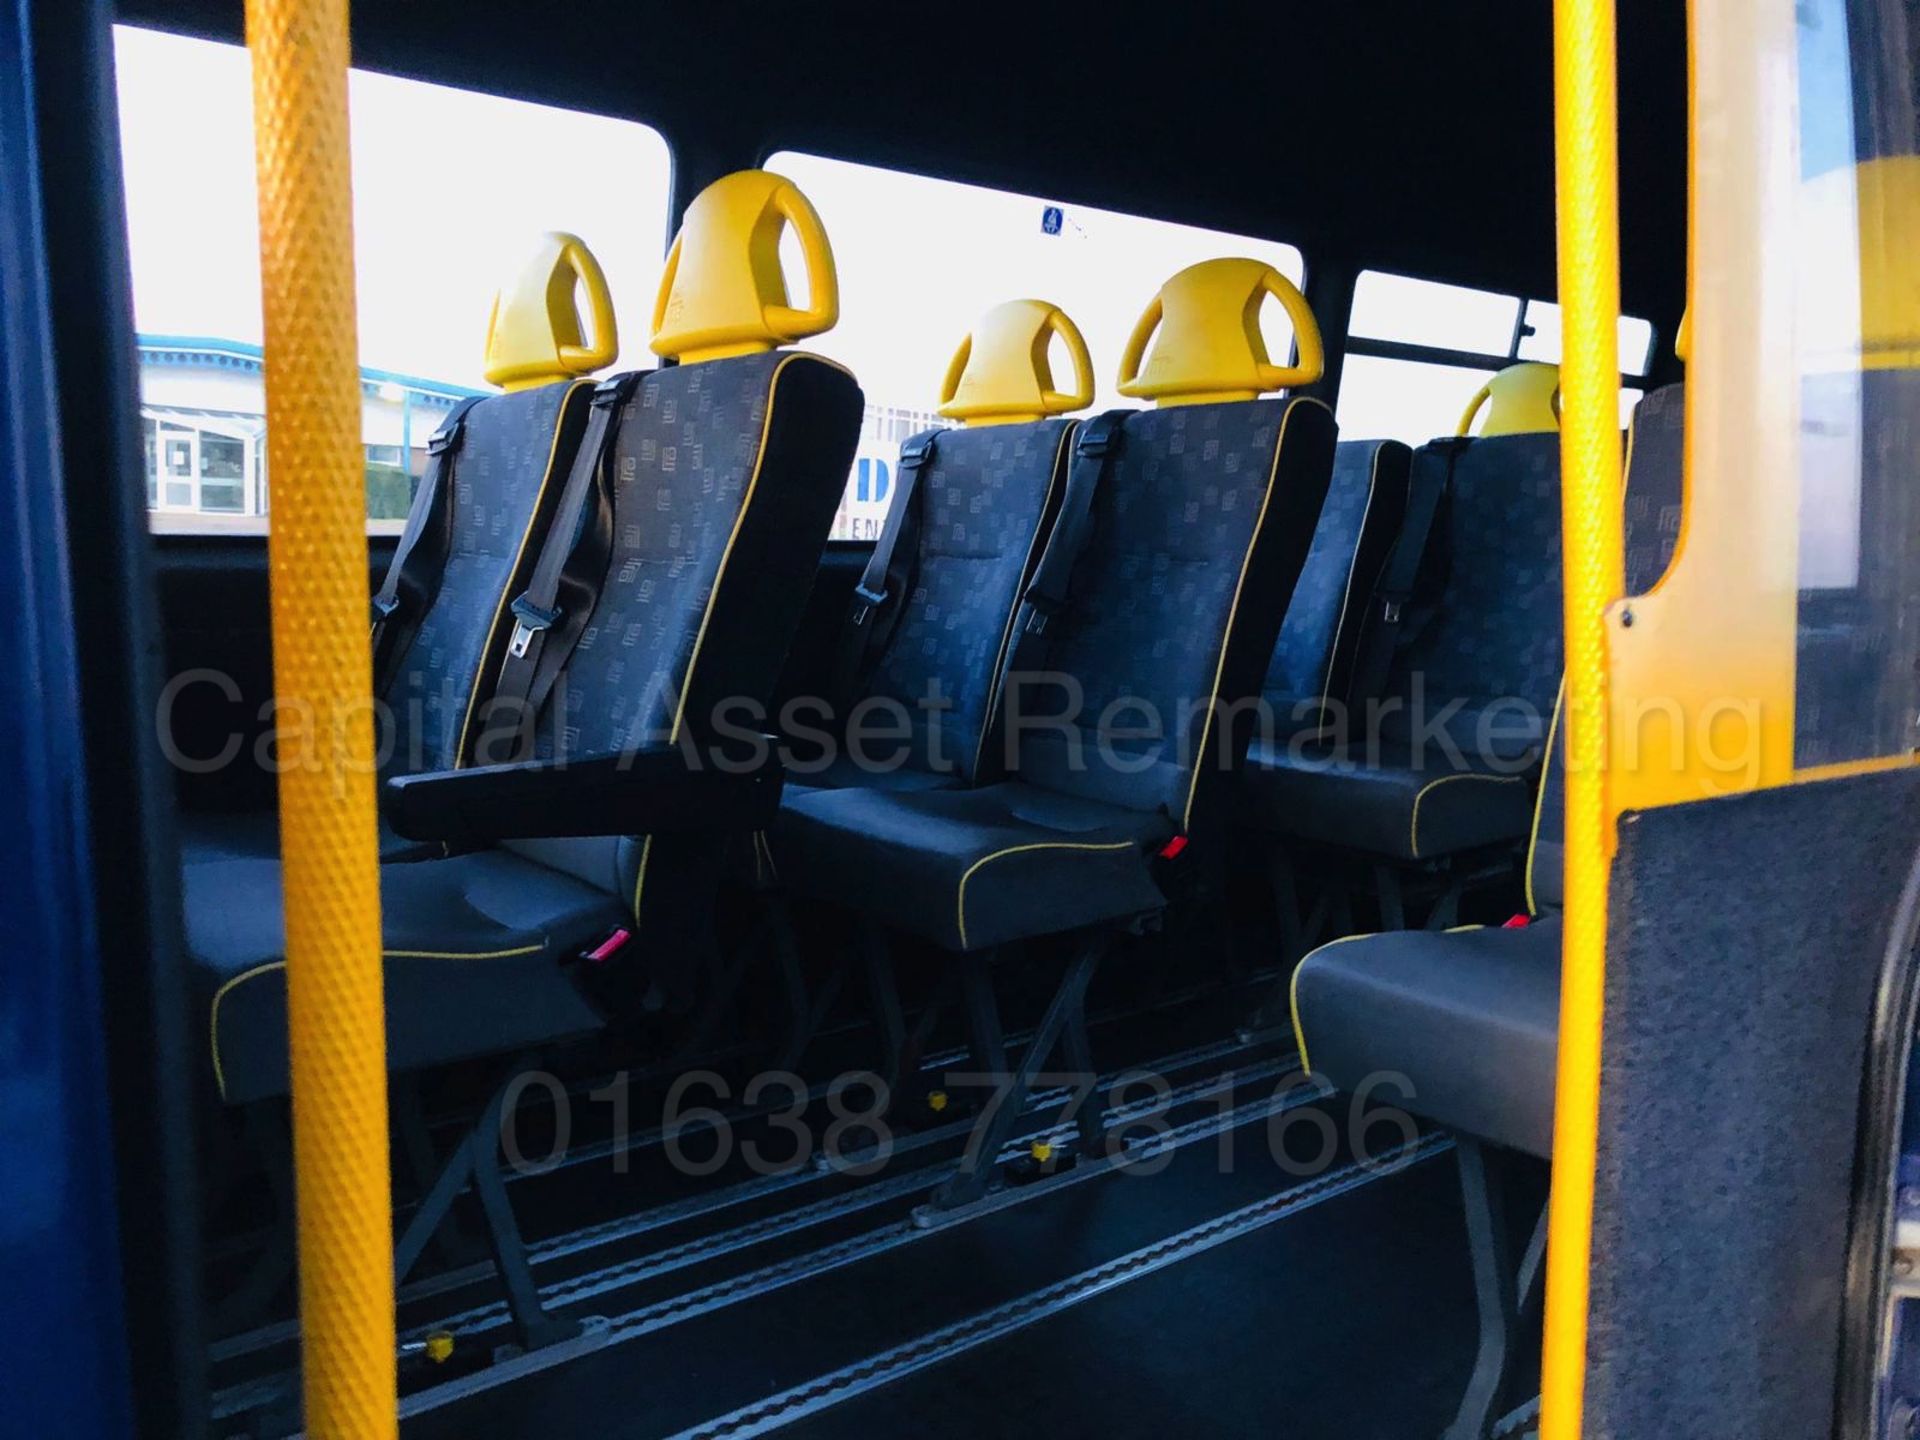 MERCEDES SPRINTER 411 CDI *LWB - 16 SEATER MINI-BUS* (2006) 'QUICK RELEASE SEATS - WHEEL CHAIR LIFT* - Image 21 of 24